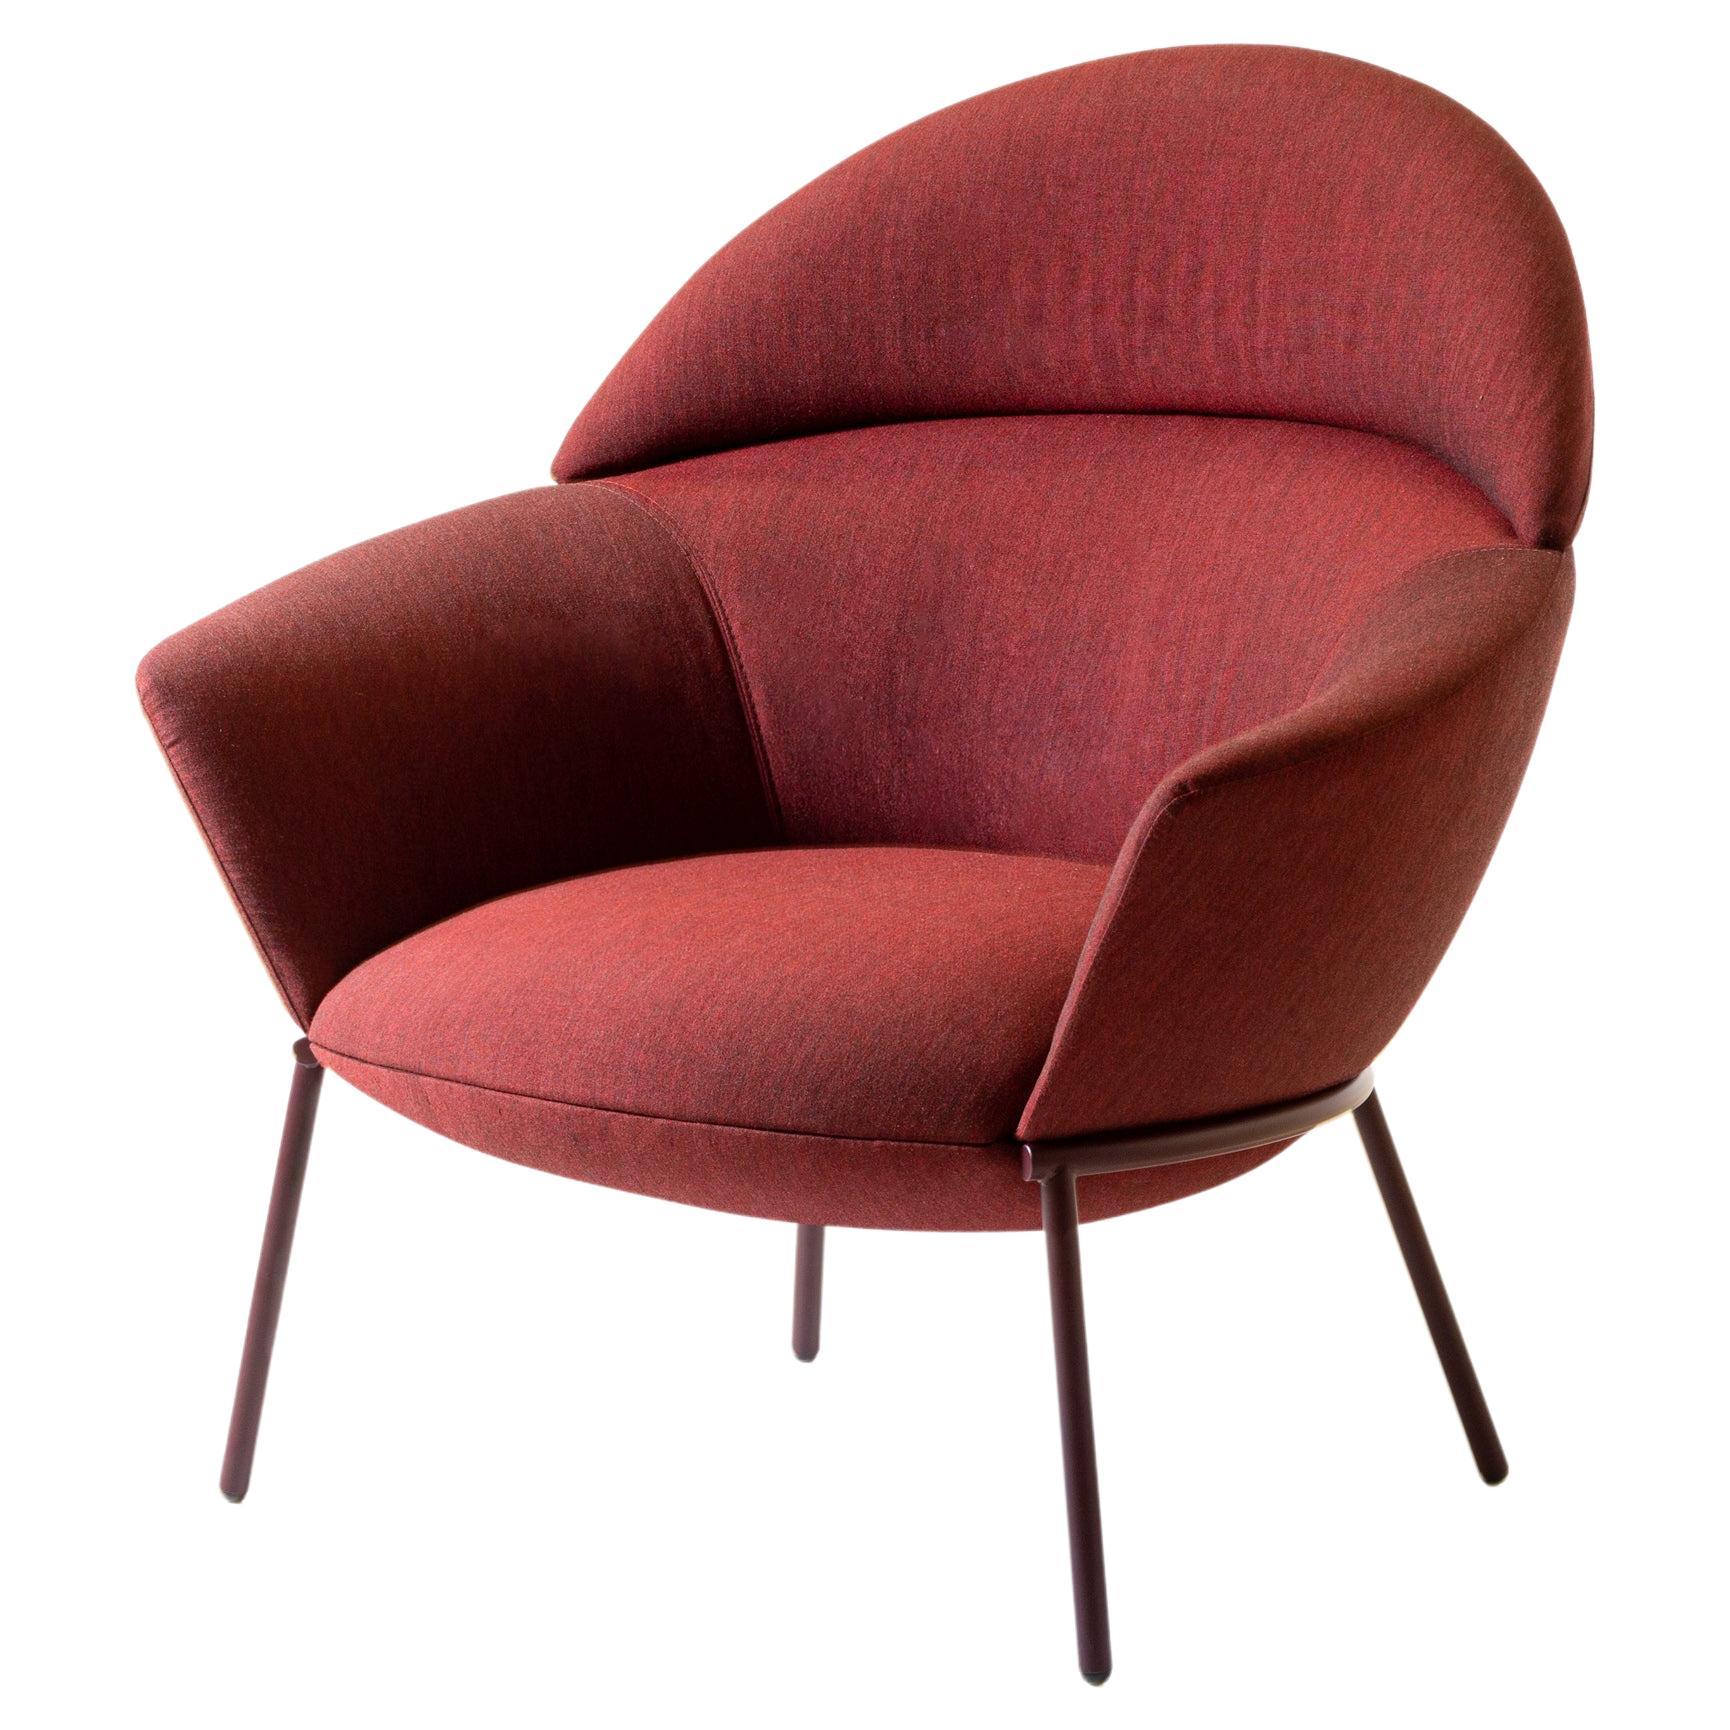 Swale High Armchair in Mélange Upholstery with Plum Base by Gordon Guillaumier For Sale